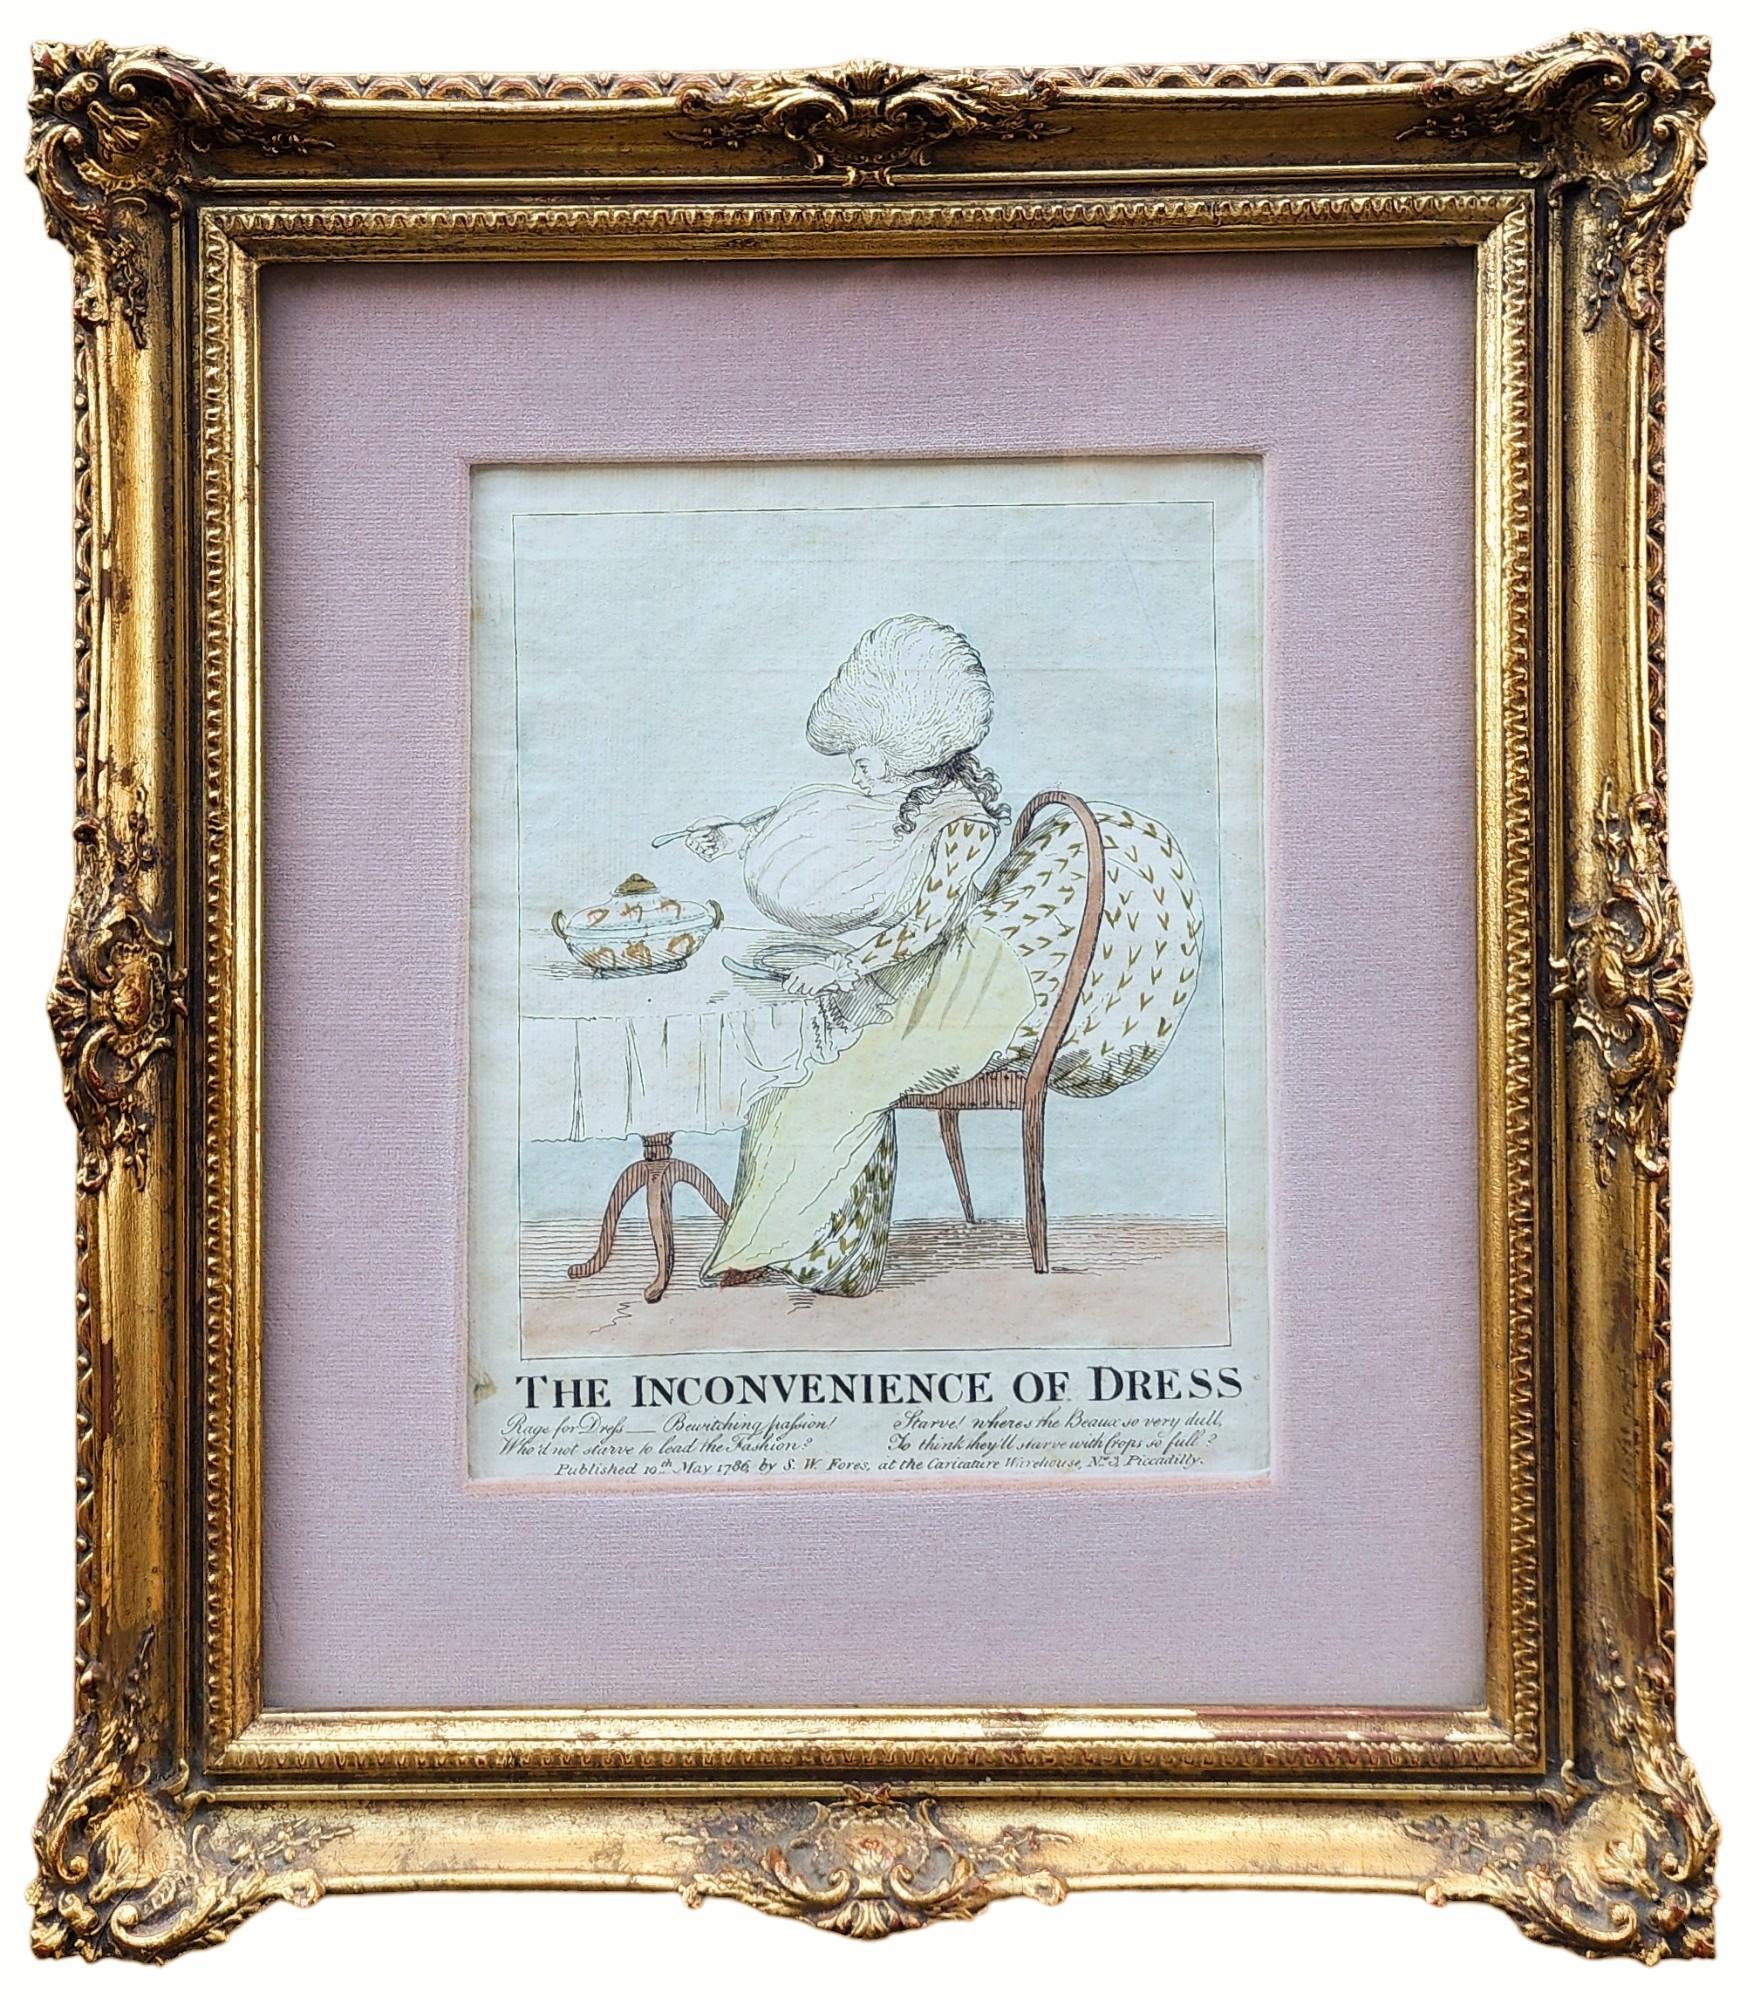 The Inconvenience of Dress, British Caricature Art - Print by George Townley Stubbs